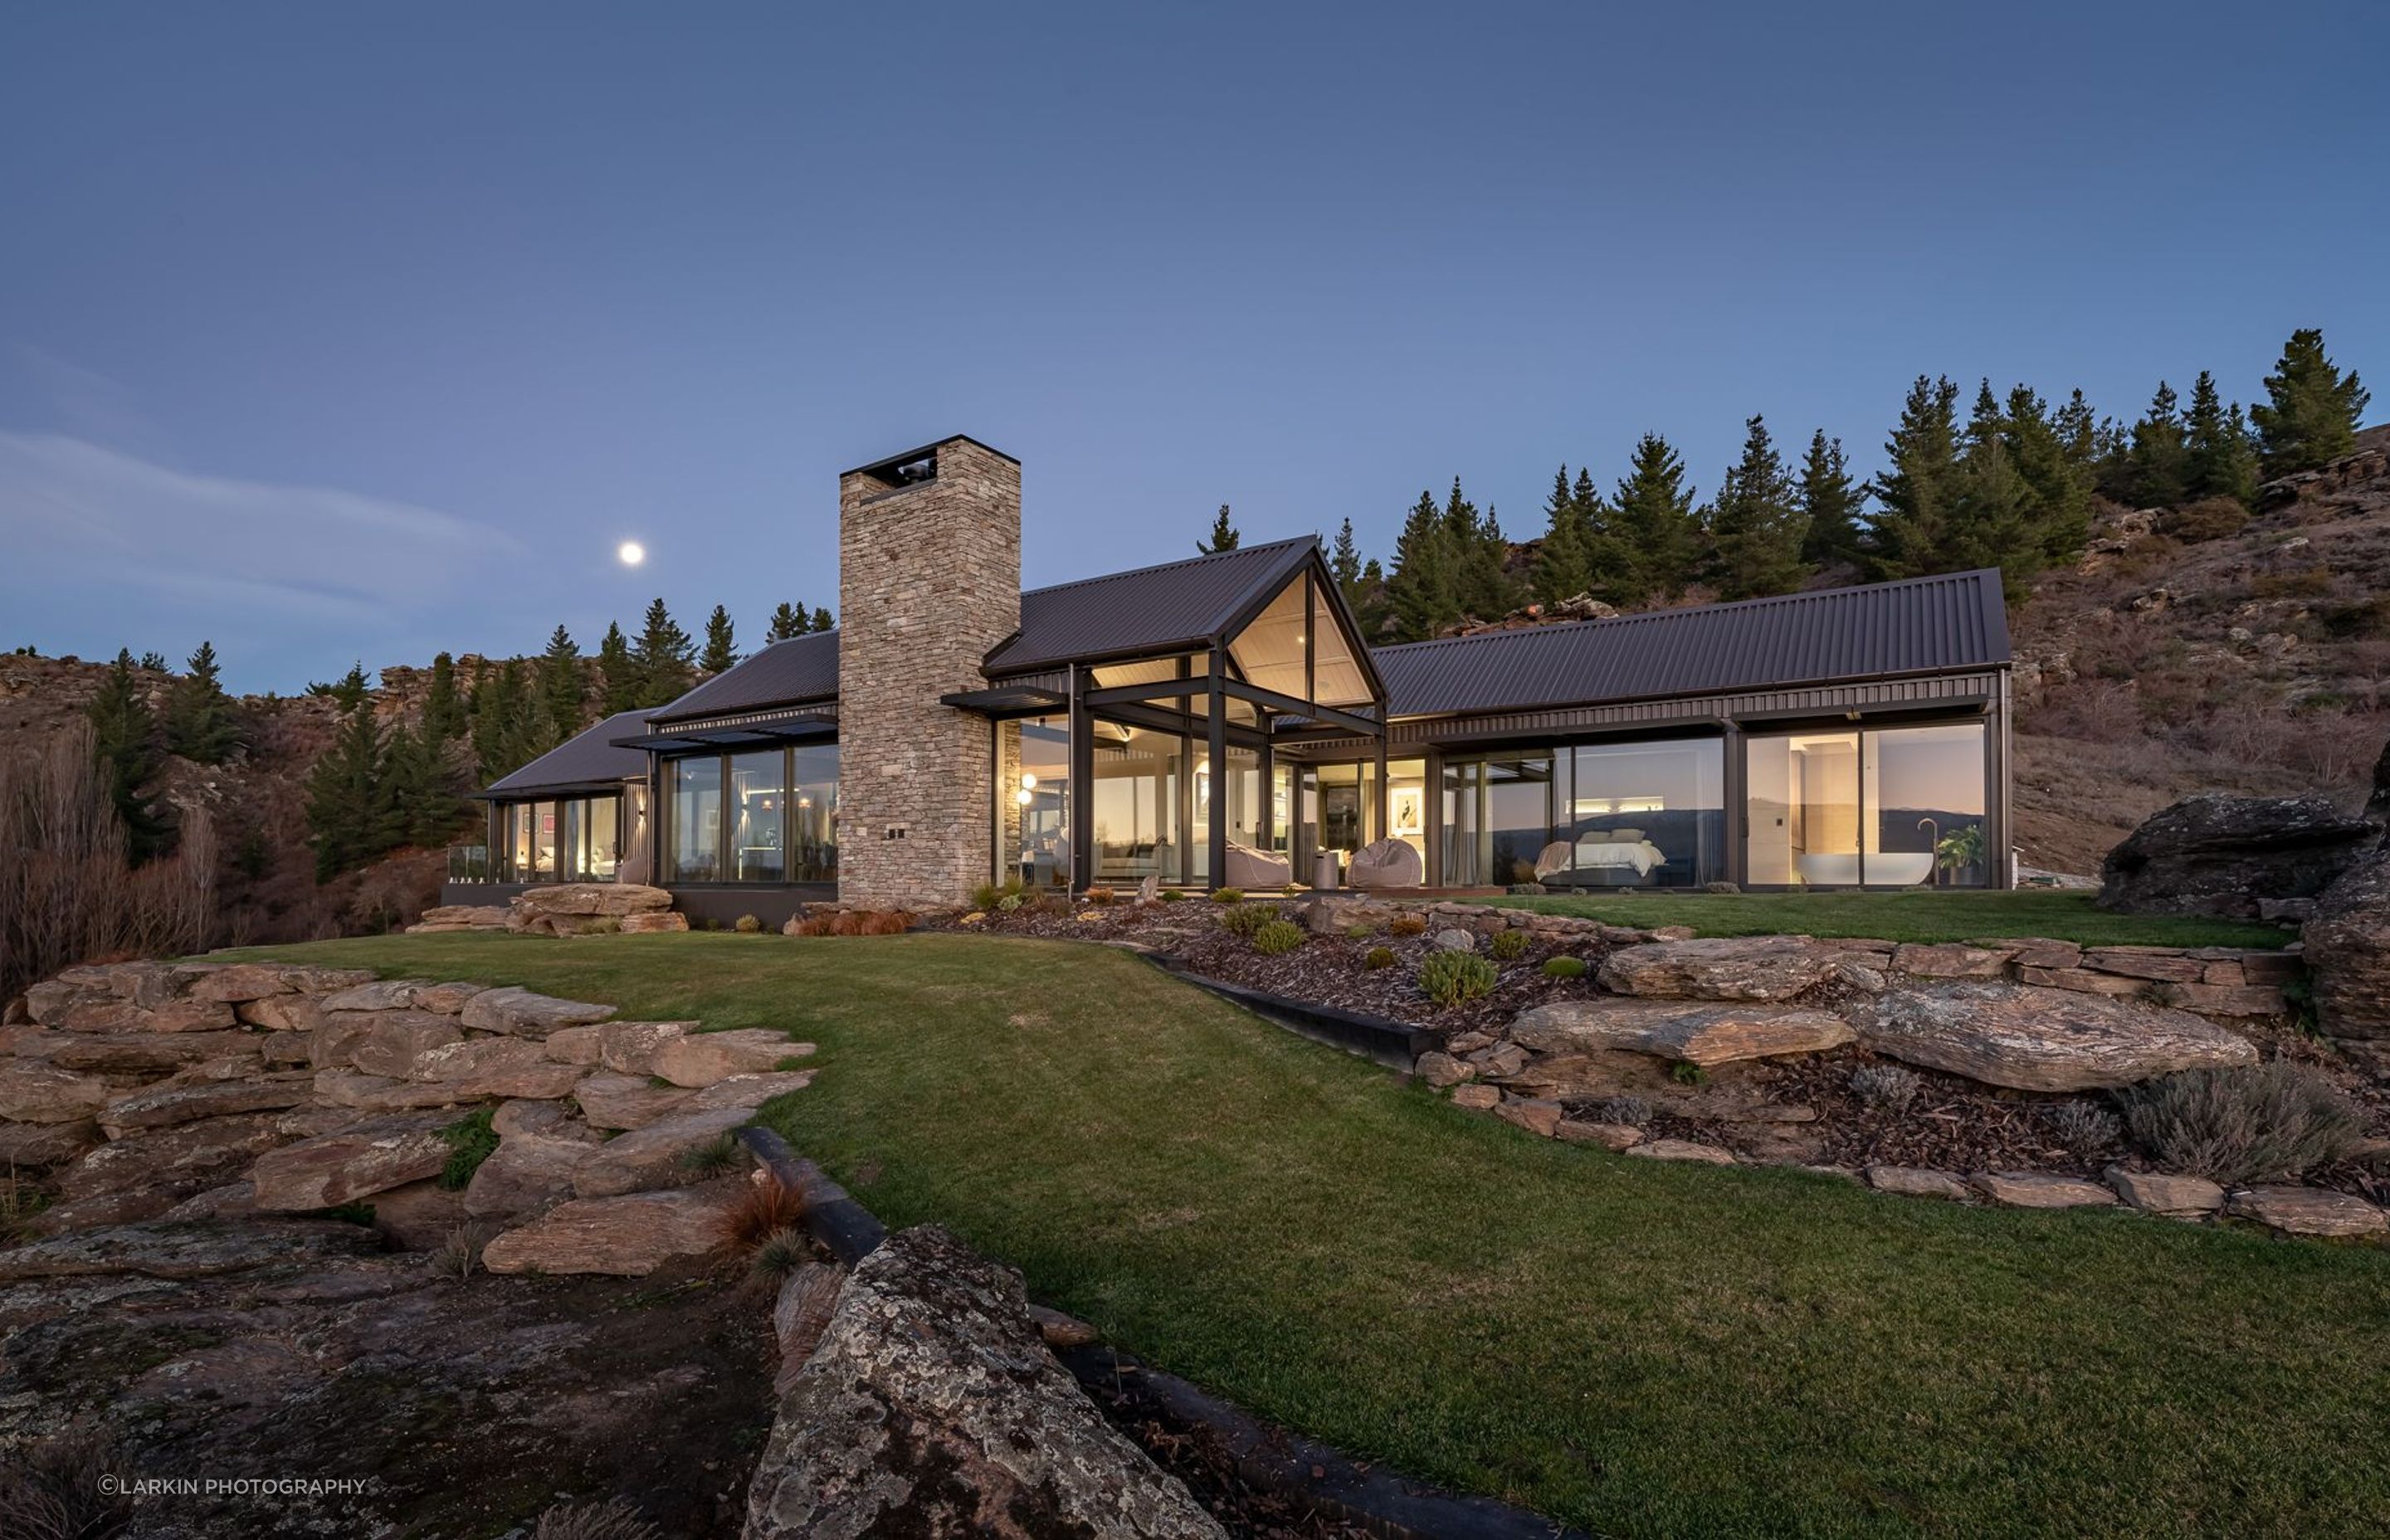 The home, built by CDL Building features three gable forms and schist chimneys.